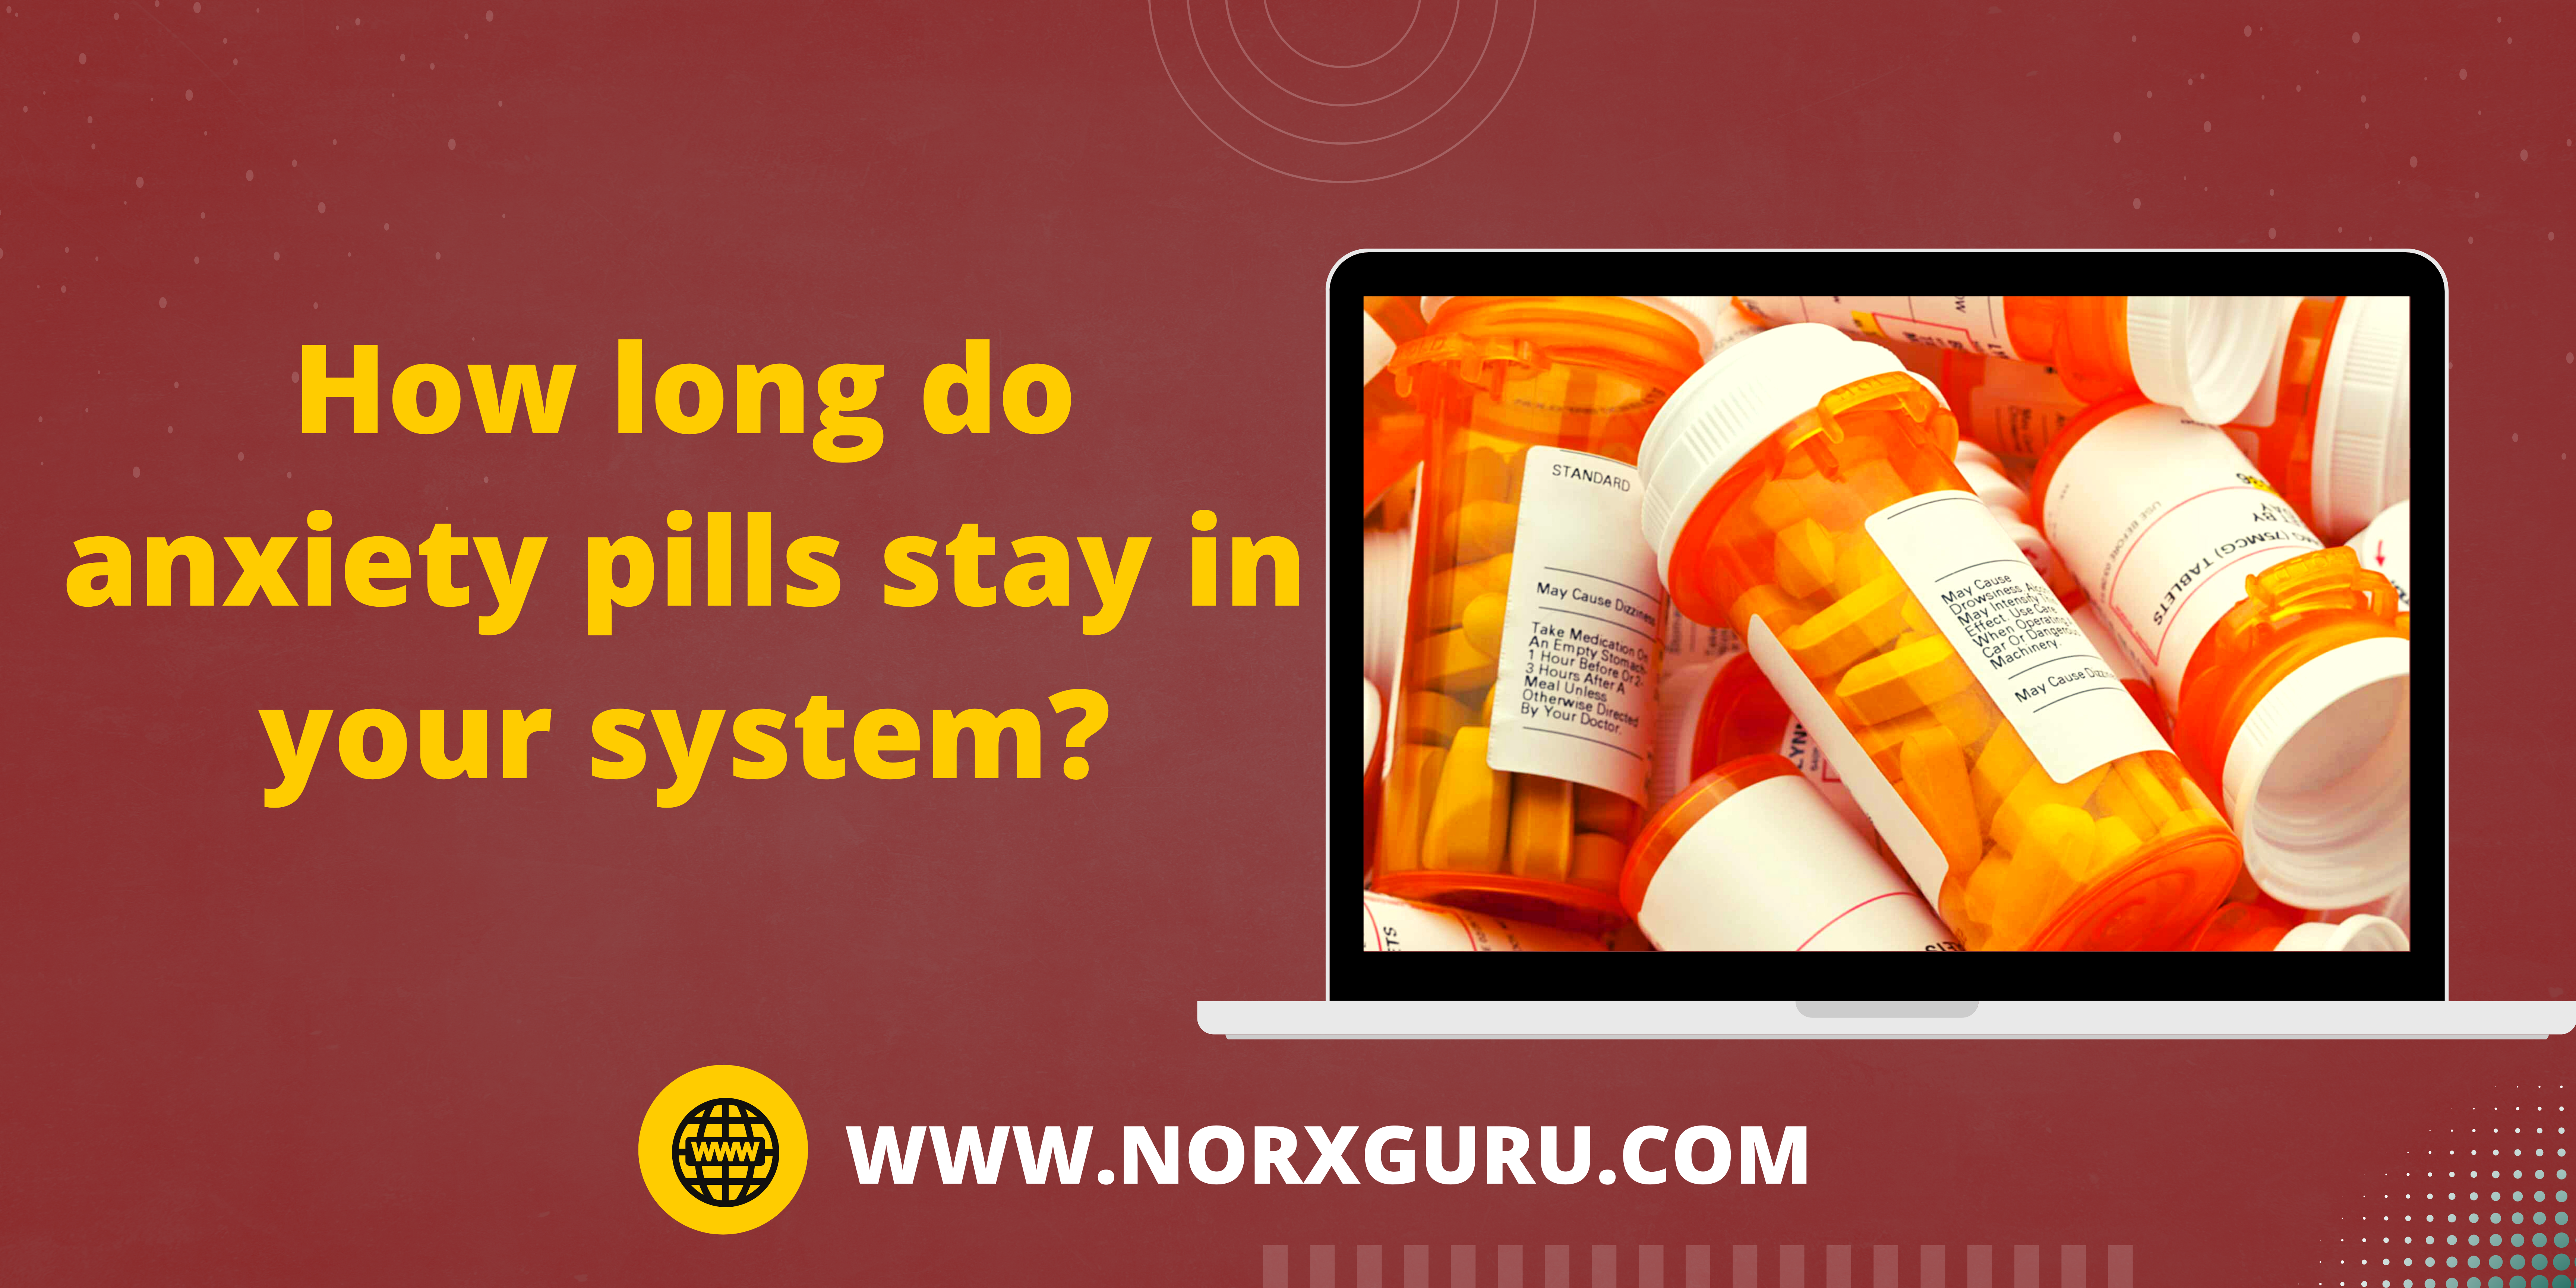 How long do anxiety pills stay in your system?